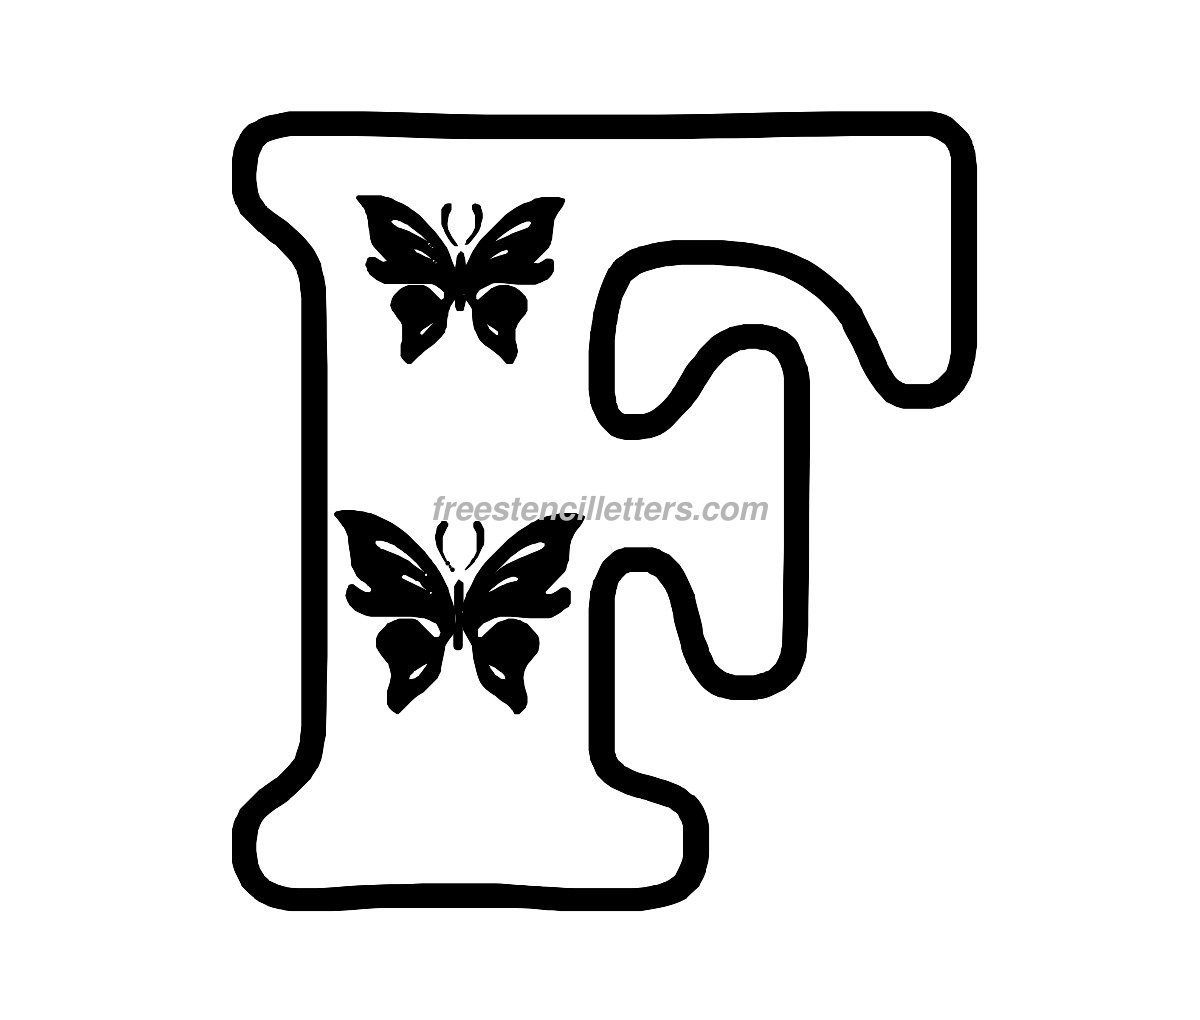 Print F Letter Stencil - Free Stencil Letters - Free Printable Alphabet Stencils To Cut Out